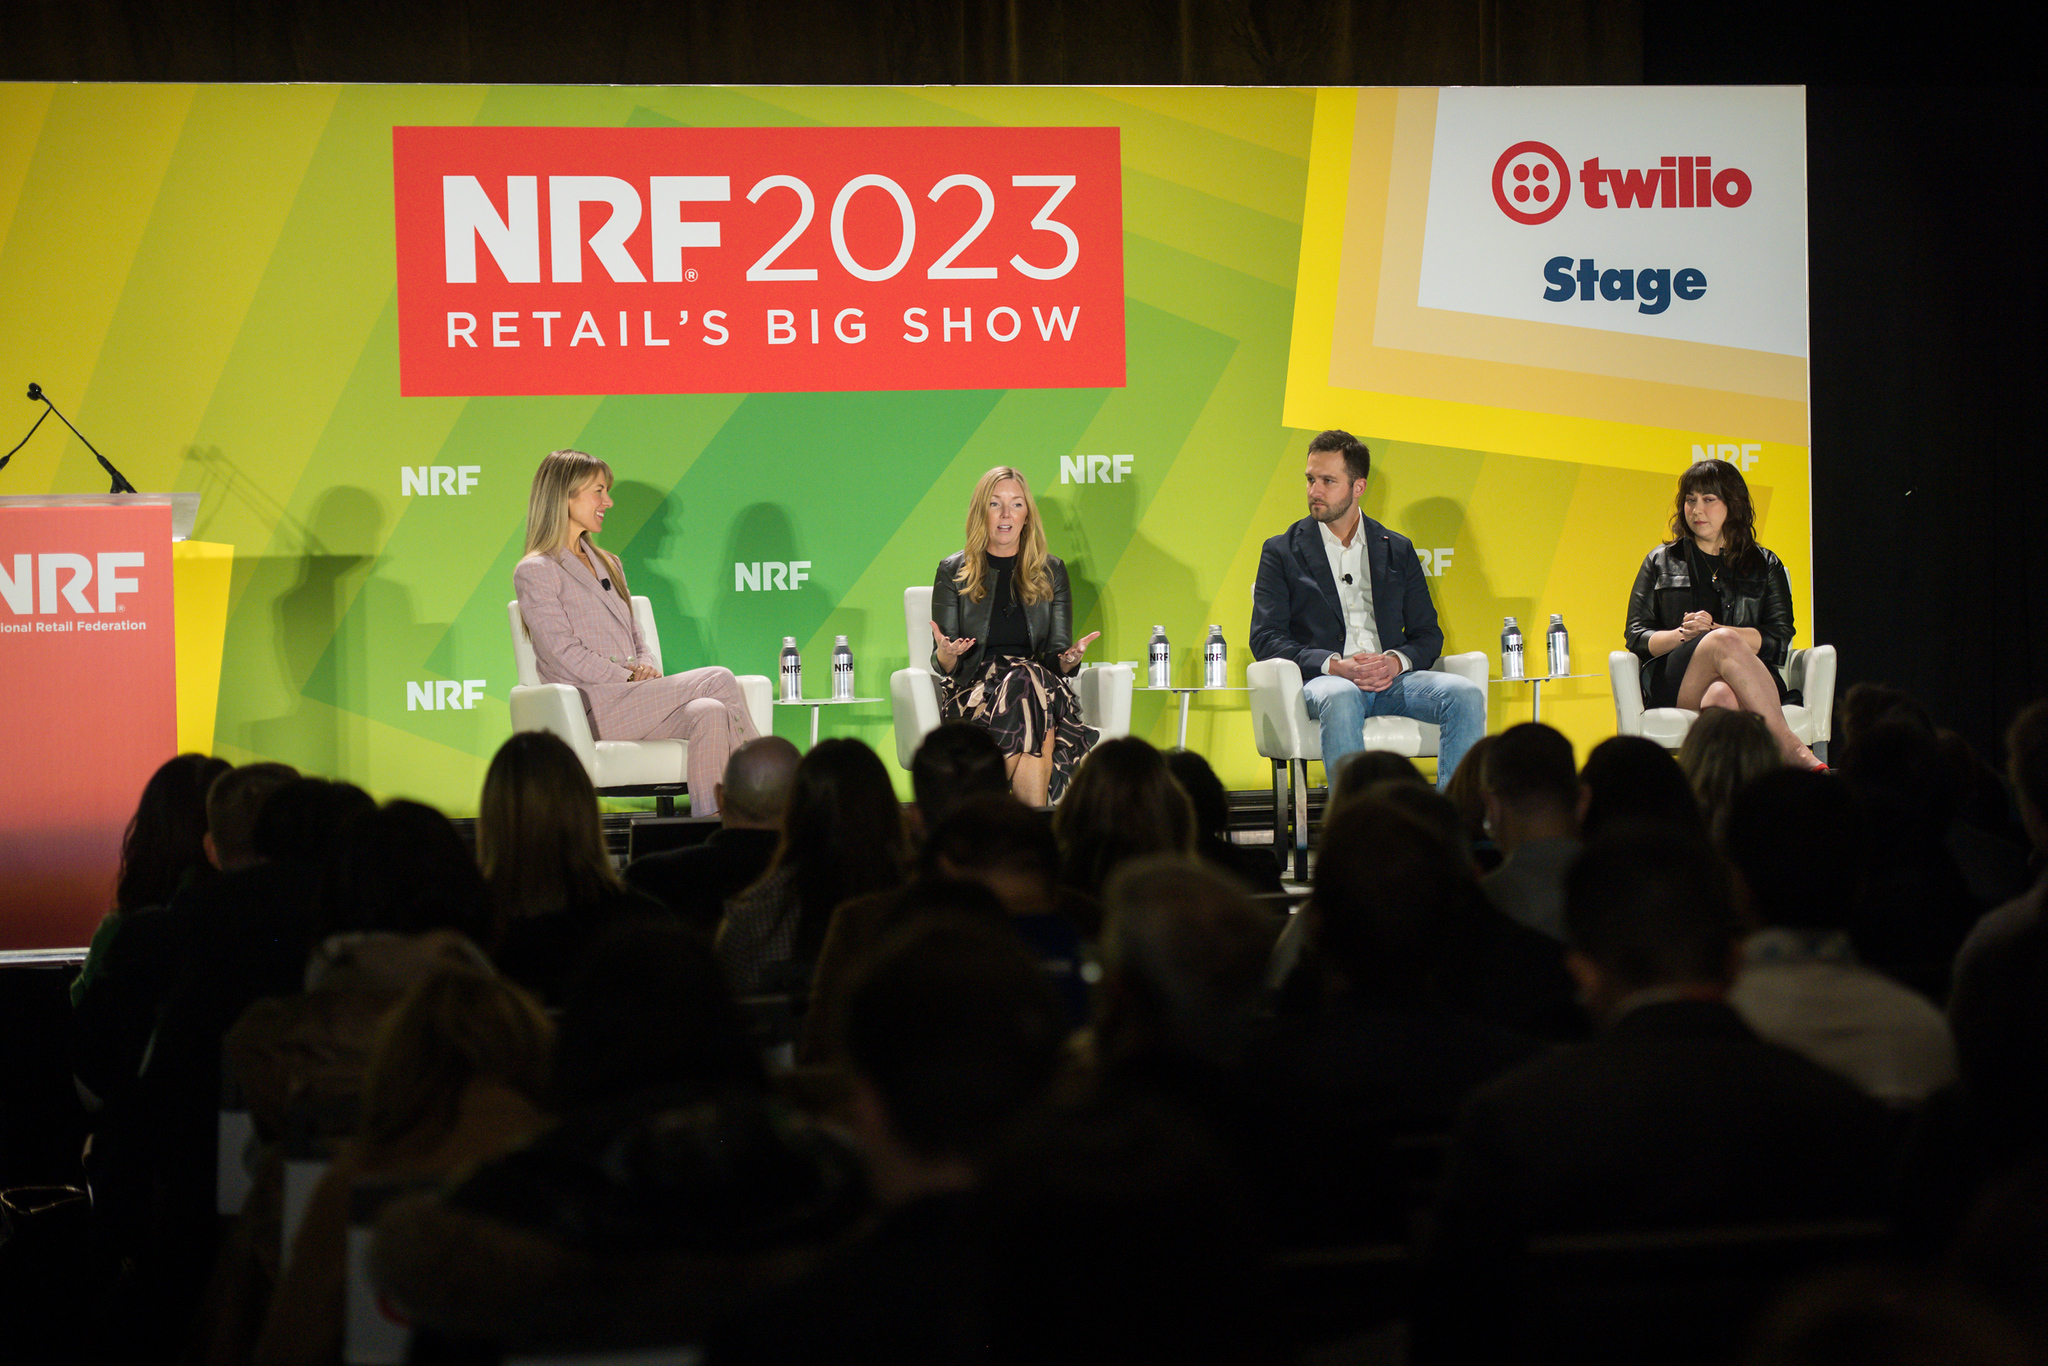 Experts on the stage at NRF 2023